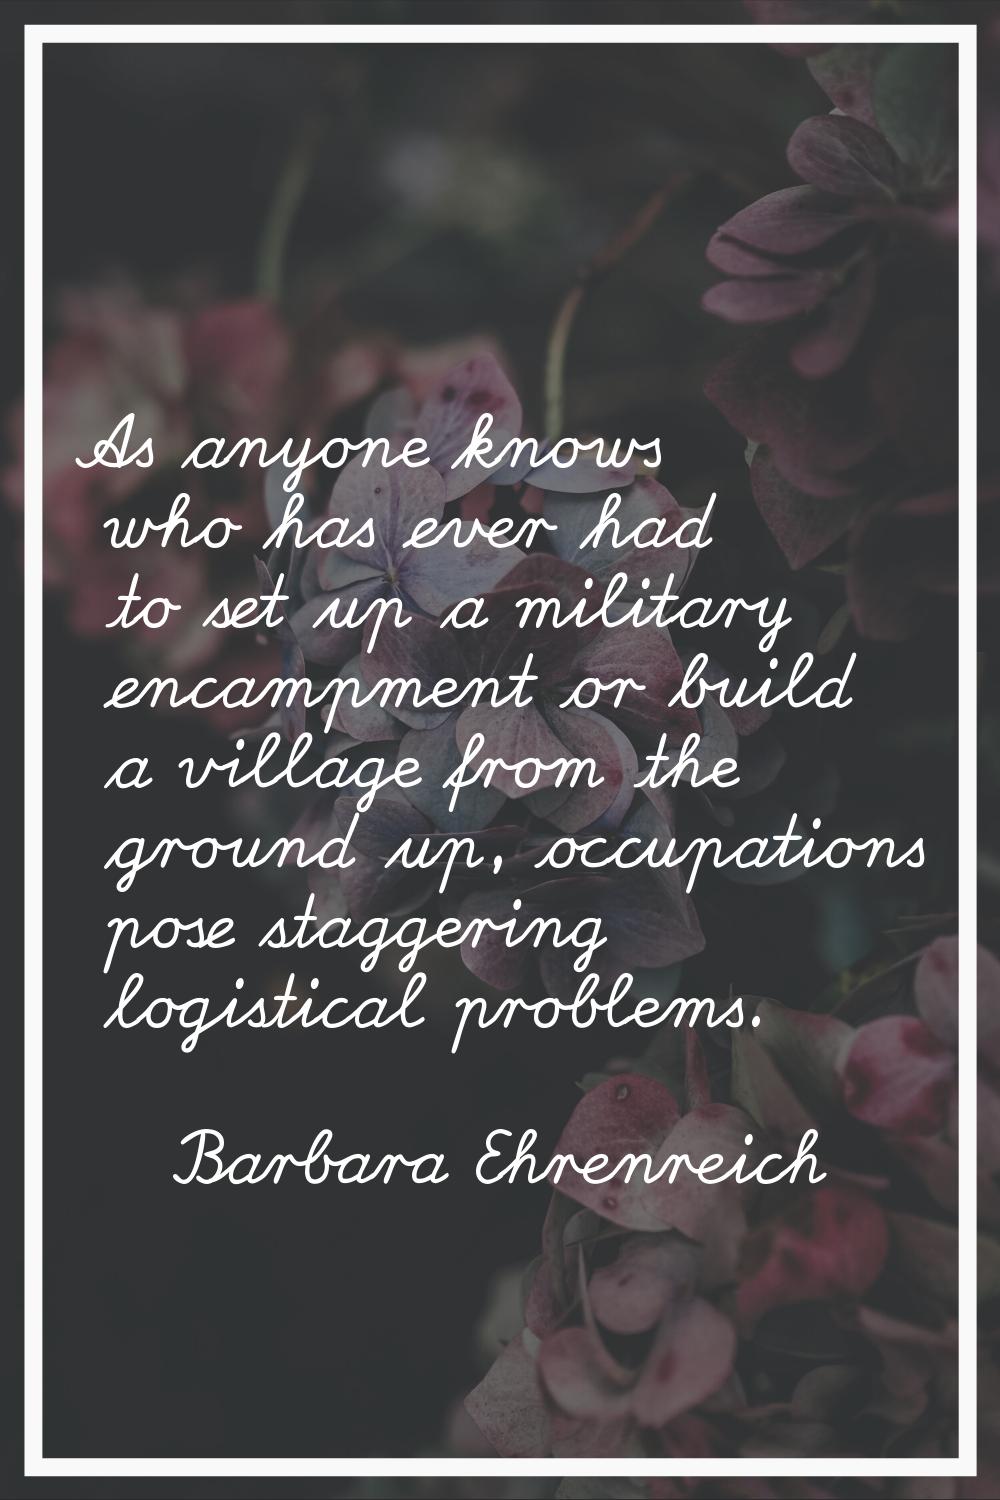 As anyone knows who has ever had to set up a military encampment or build a village from the ground